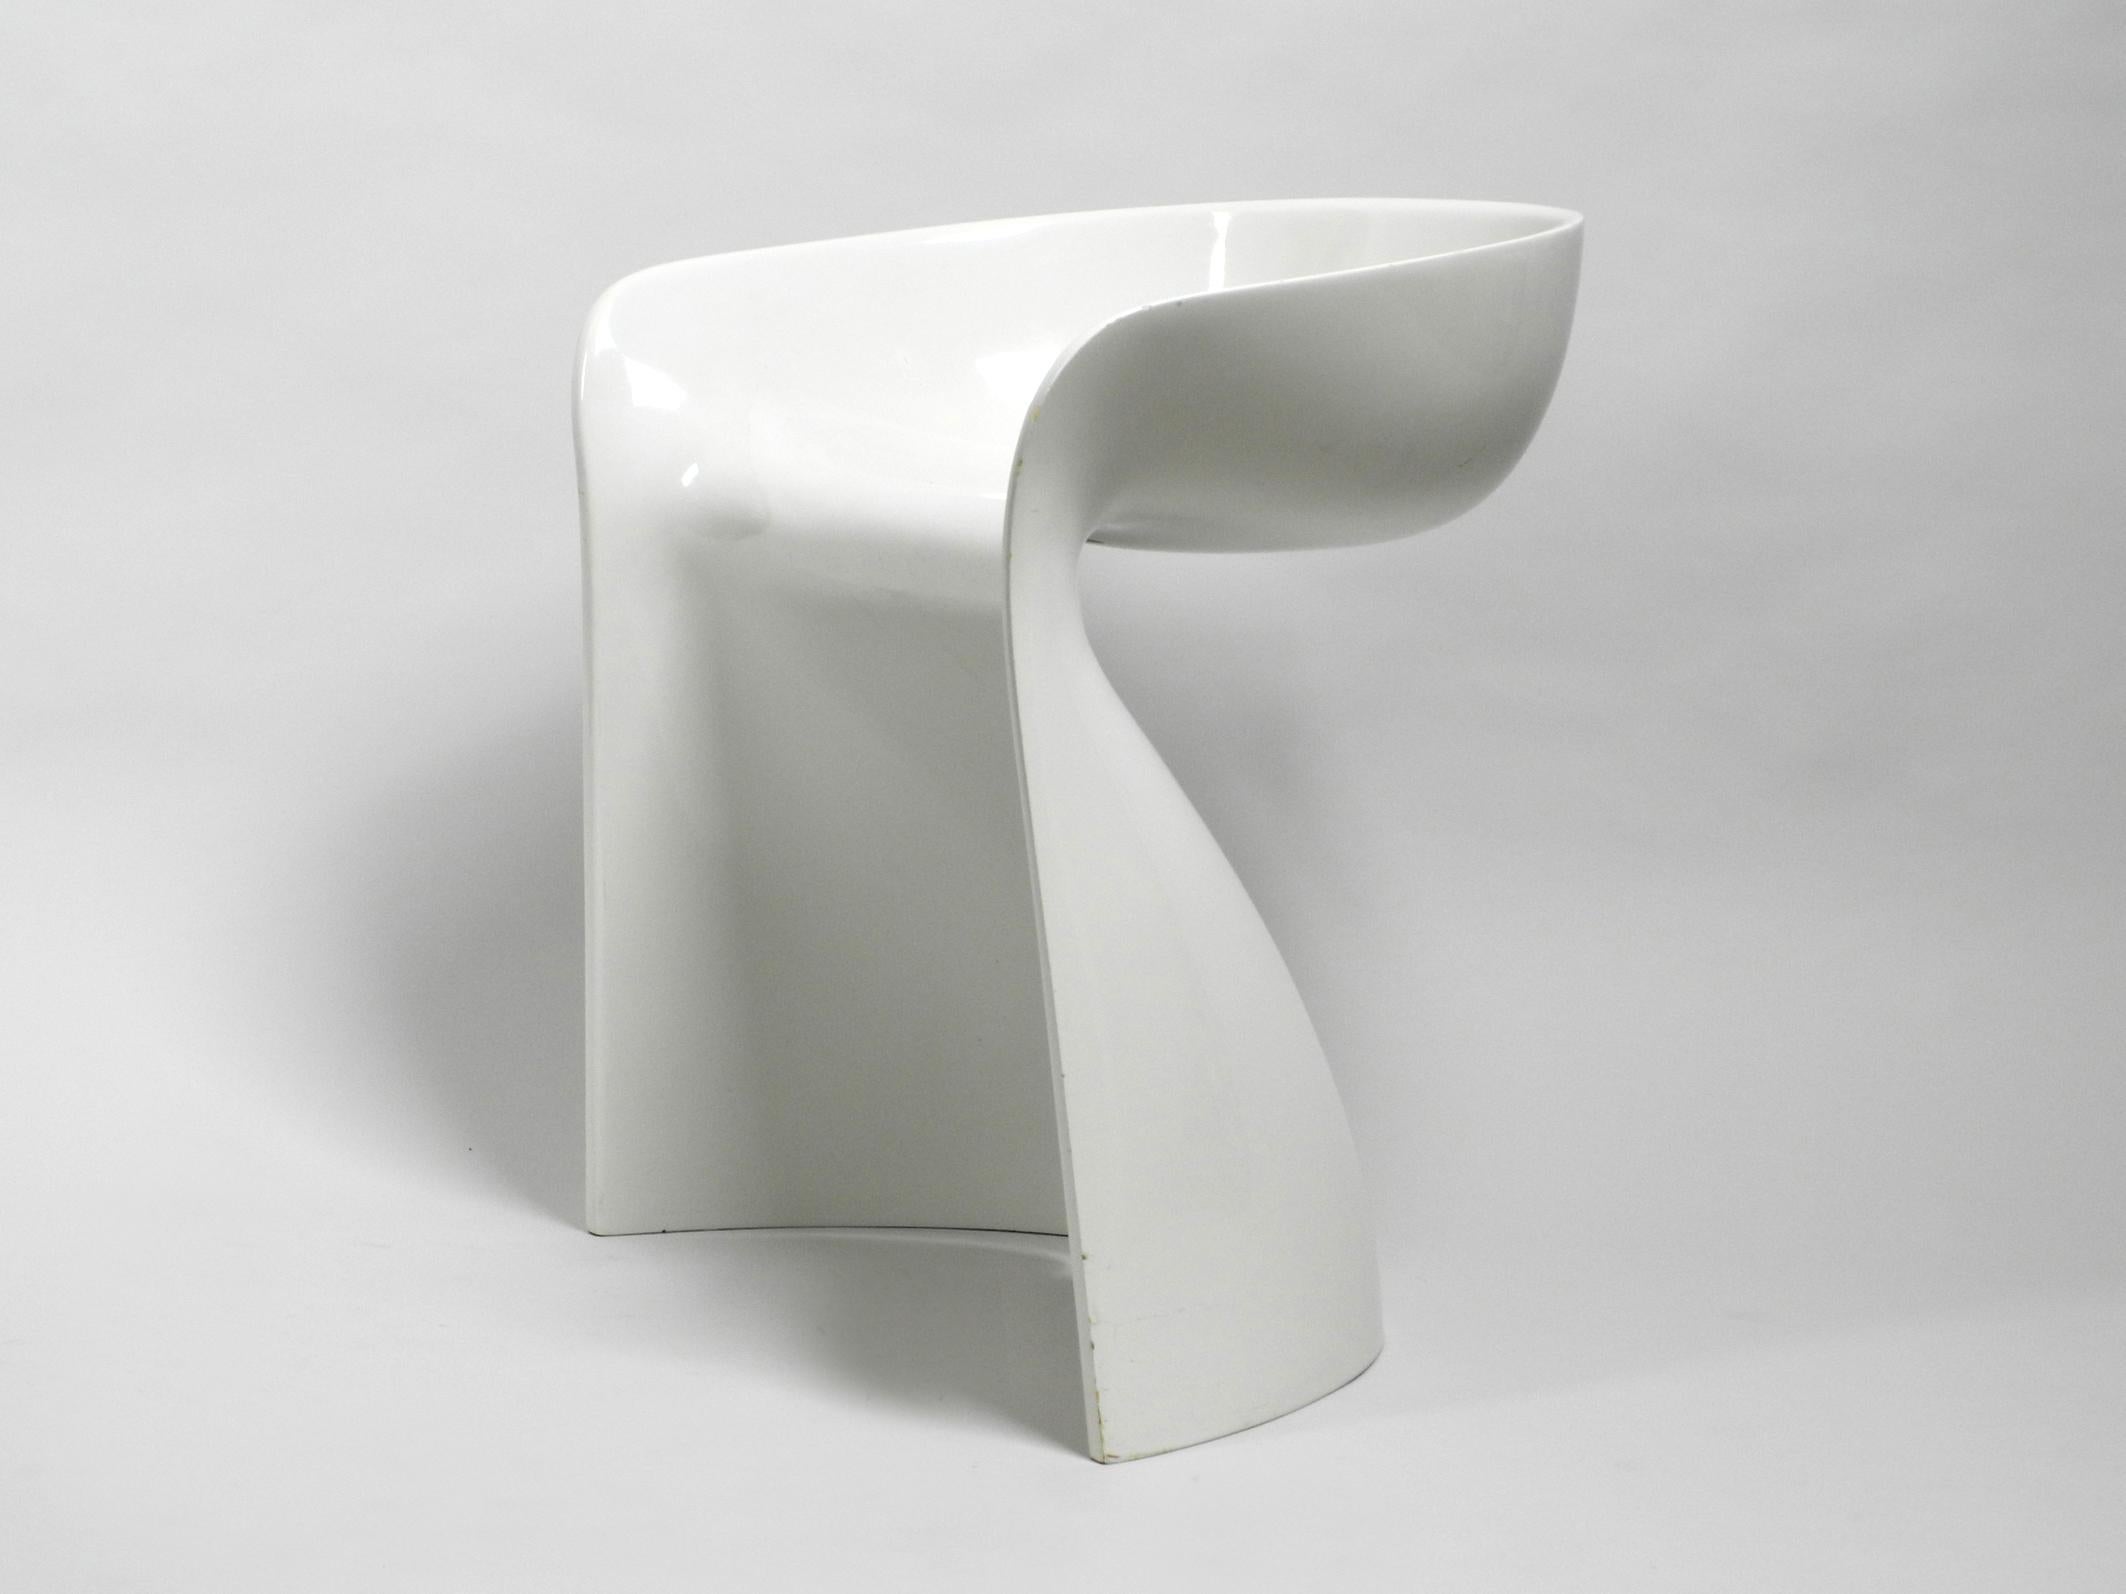 Rare White Stool by Winfried Staeb from the 1970s for Form + Life Collection 4